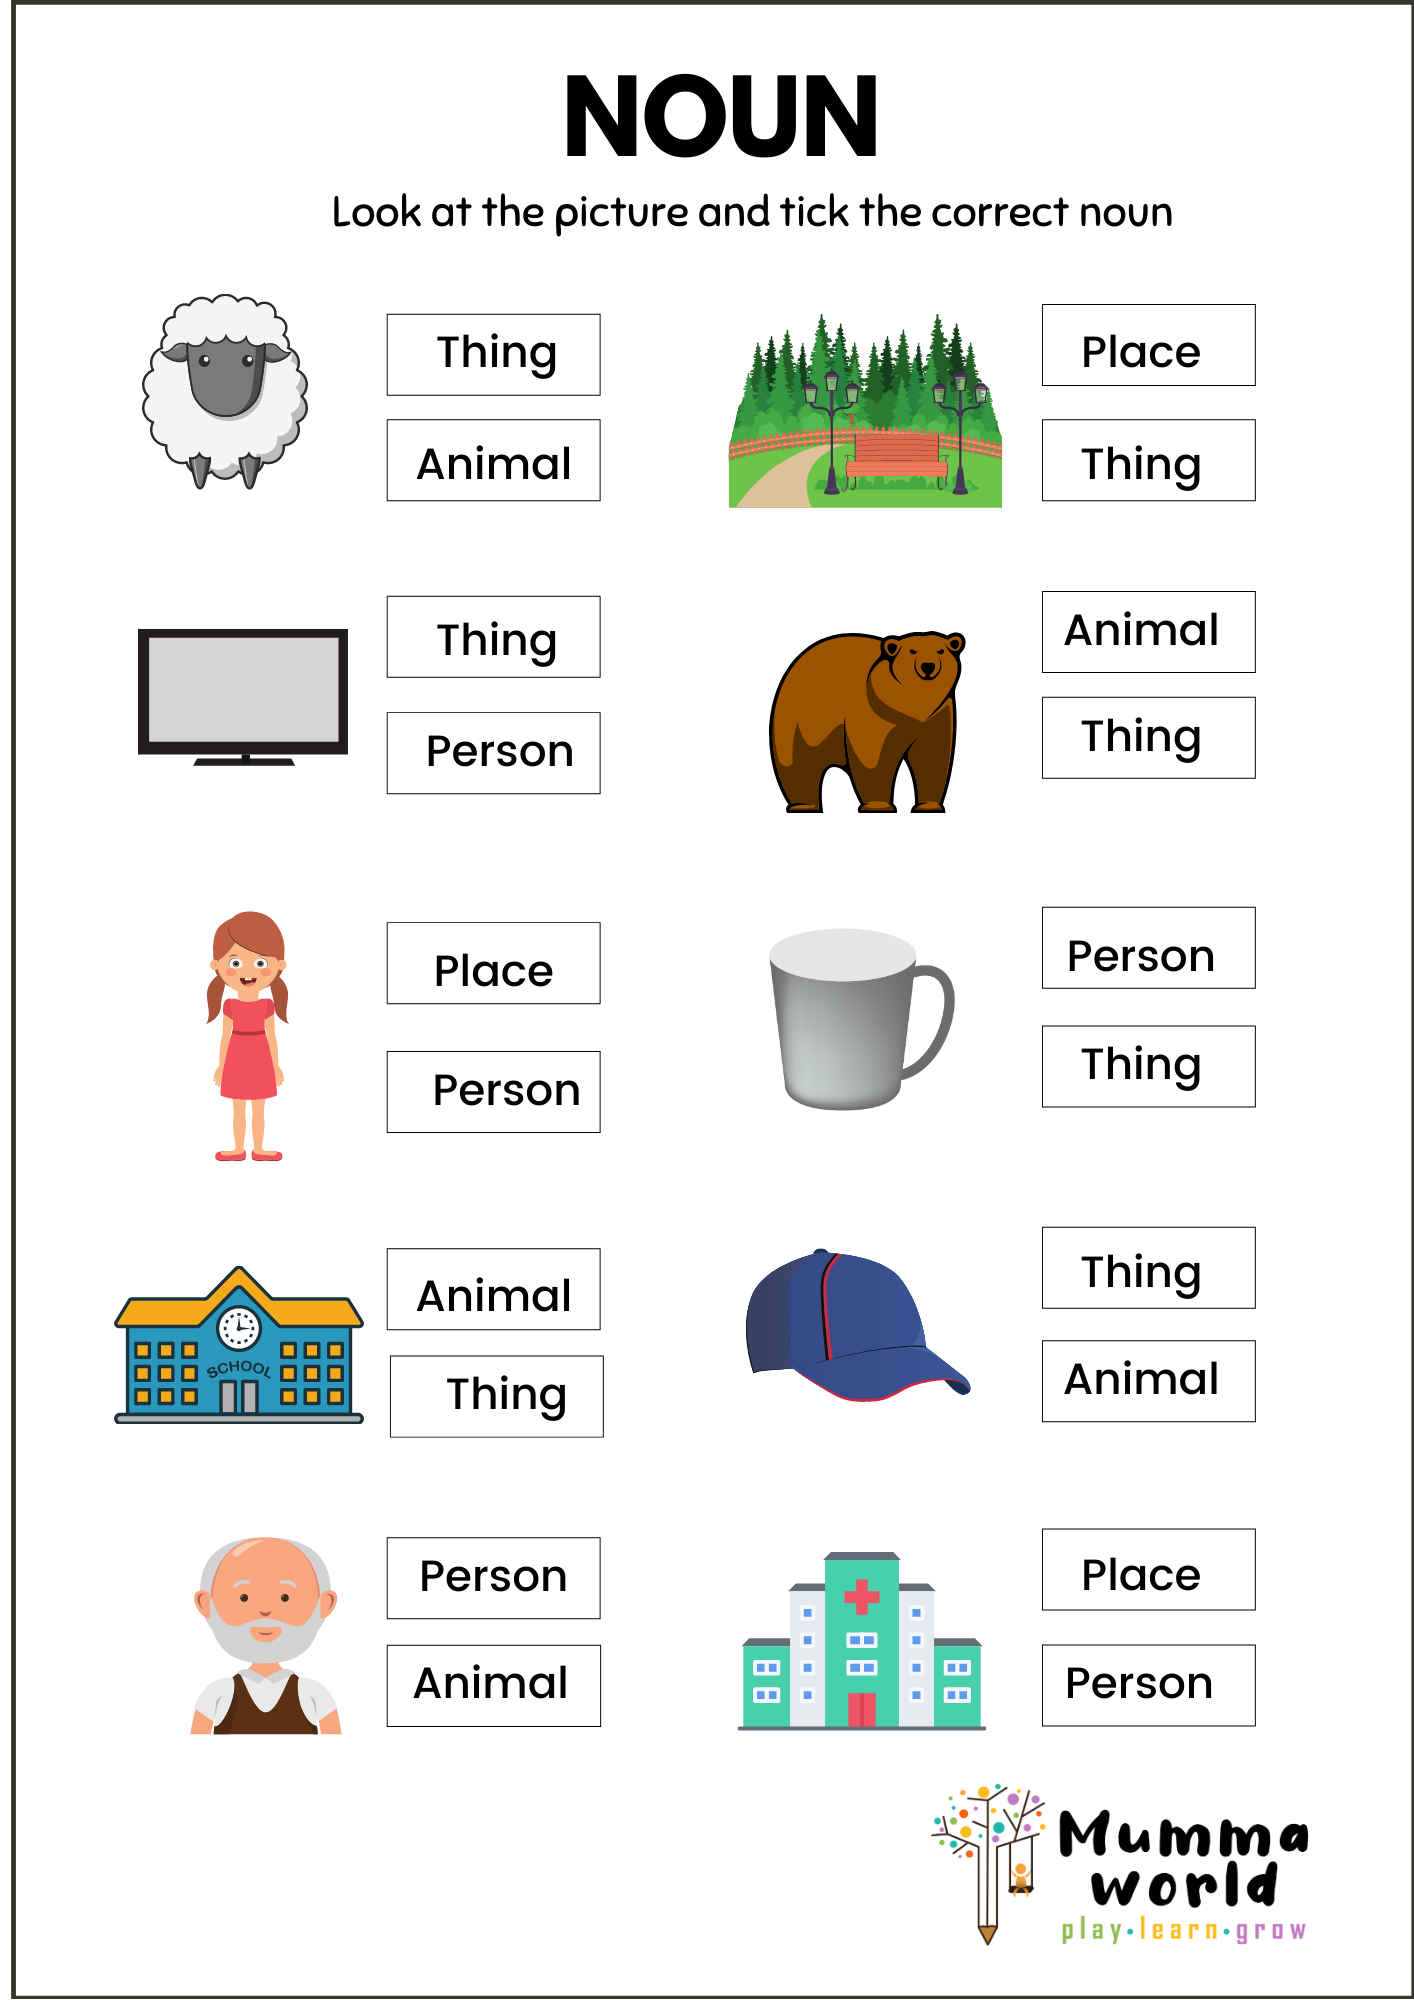 greetings-and-polite-expressions-worksheets-for-kindergarten-esl-math-greetings-and-polite